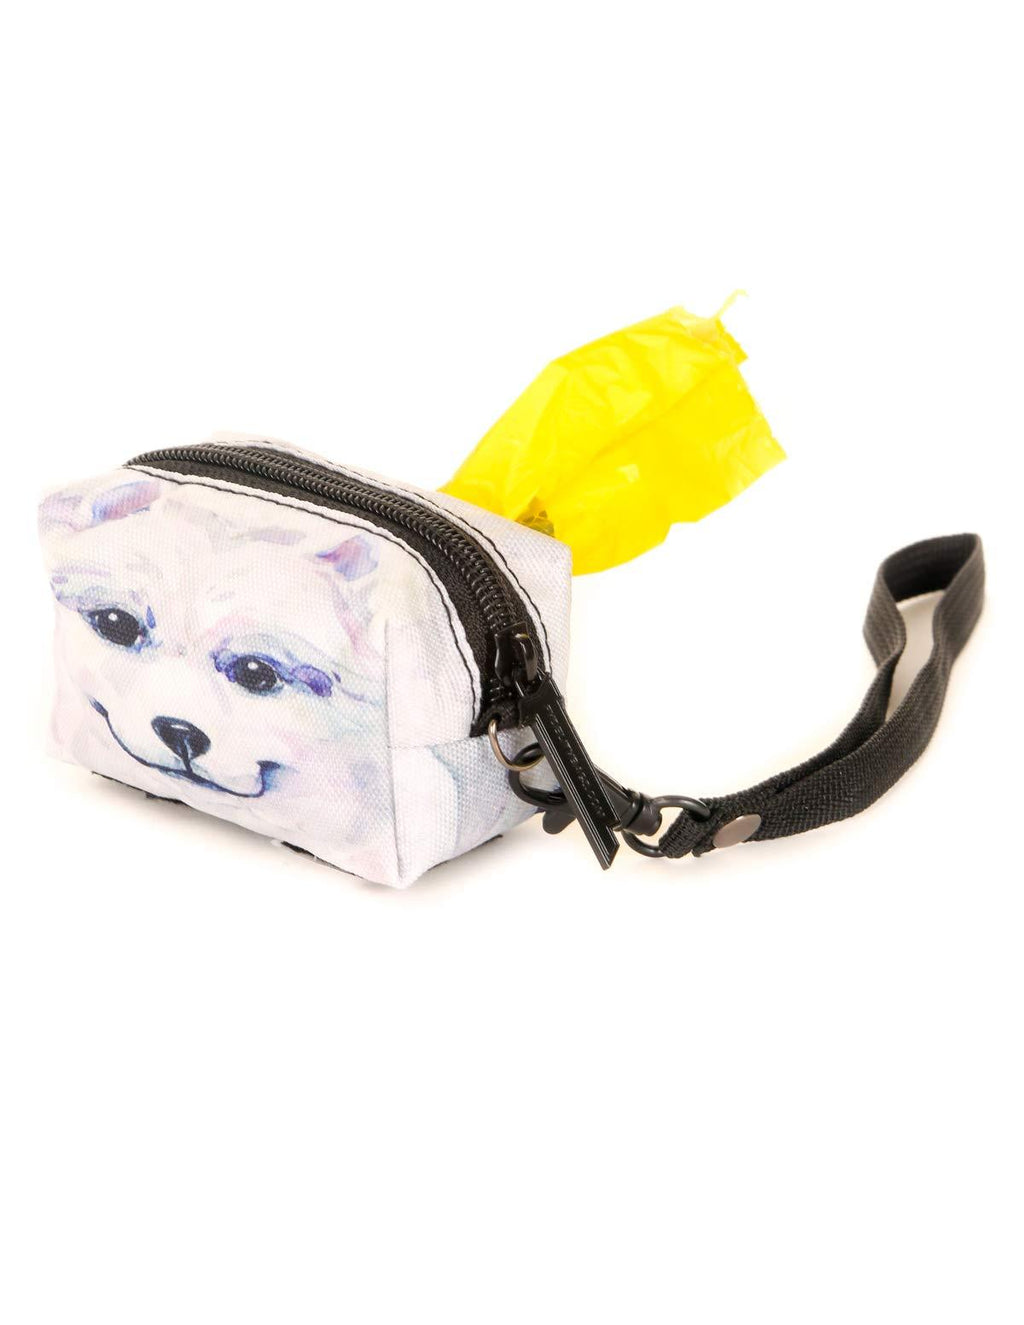 [Australia] - Fydelity poopyCUTE- Doggy Poop Waste Bag Dispenser for Fashionably Cute Owner and Dog Breed,Puppy Supply|Women Luxury Fashion Style, On Leash Holder Clip for Bag/Travel/Walking/Treat/Key FYDELITY- poopyCUTE: DOGGIE Eskimo Dog 